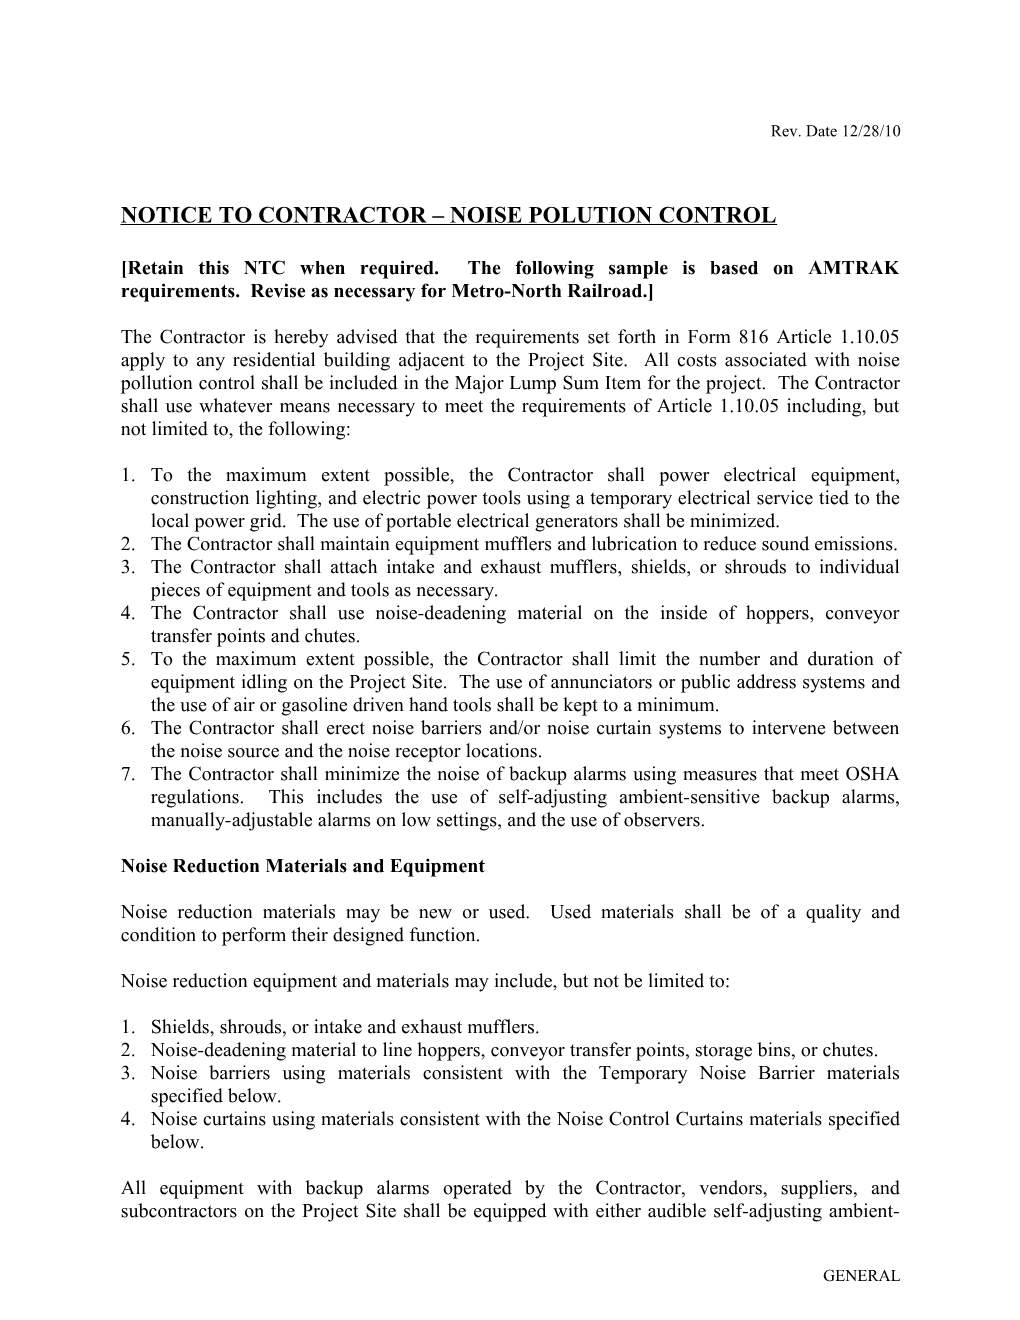 Notice to Contractor Noise Polution Control